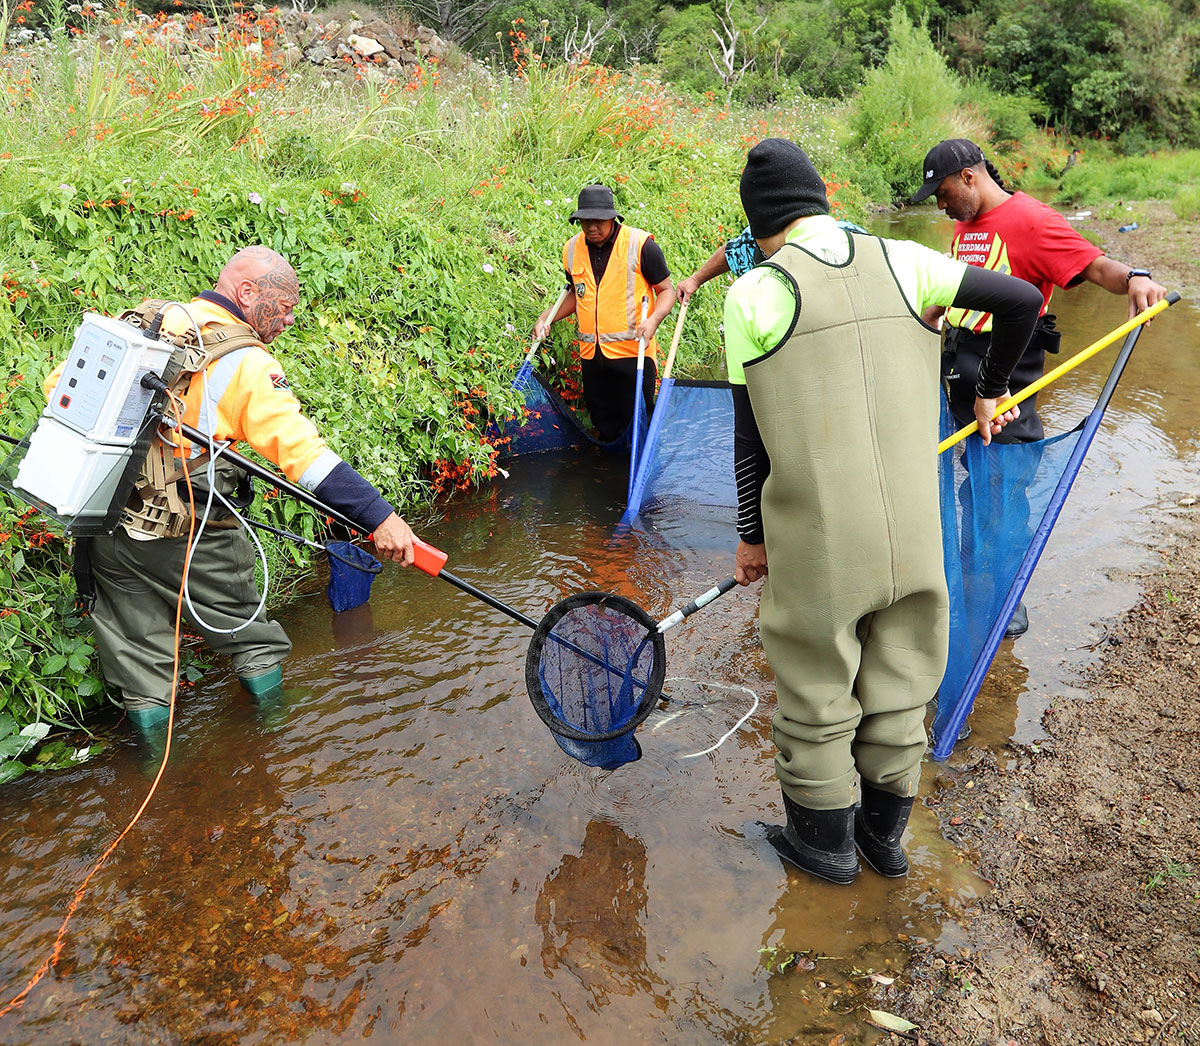 People with nets and equipment in a stream.